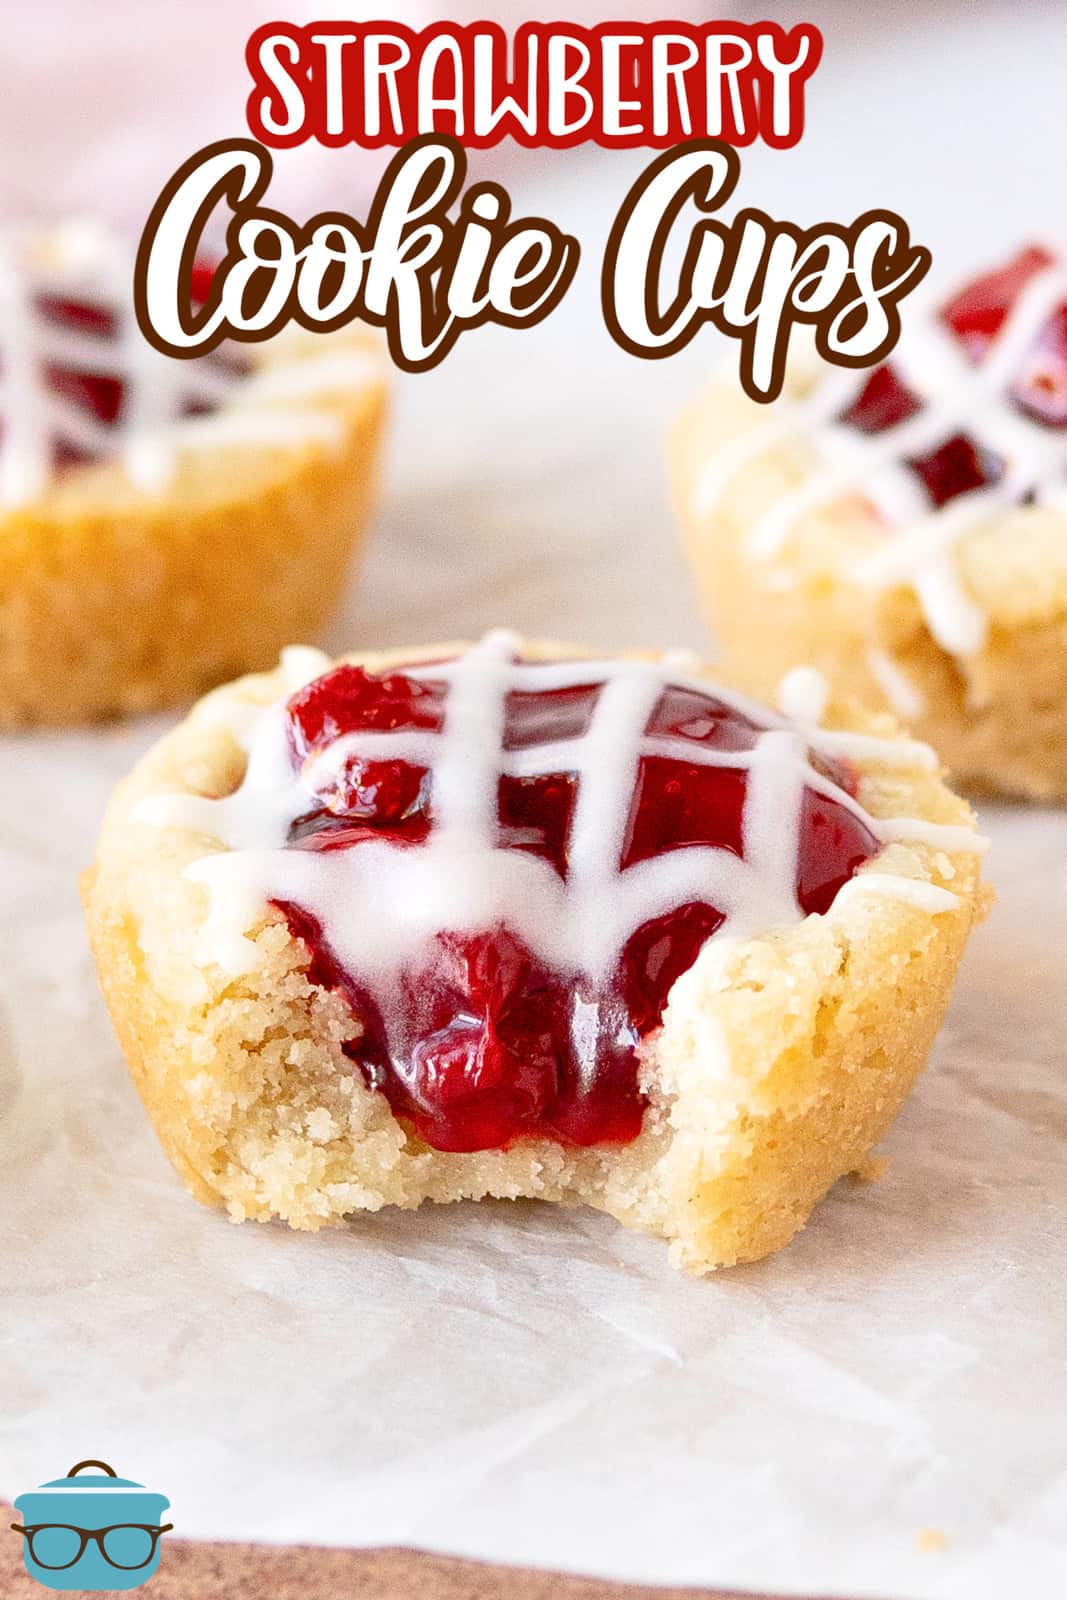 Pinterest image of Strawberry Cookie Cups with front one having a bite out of it.